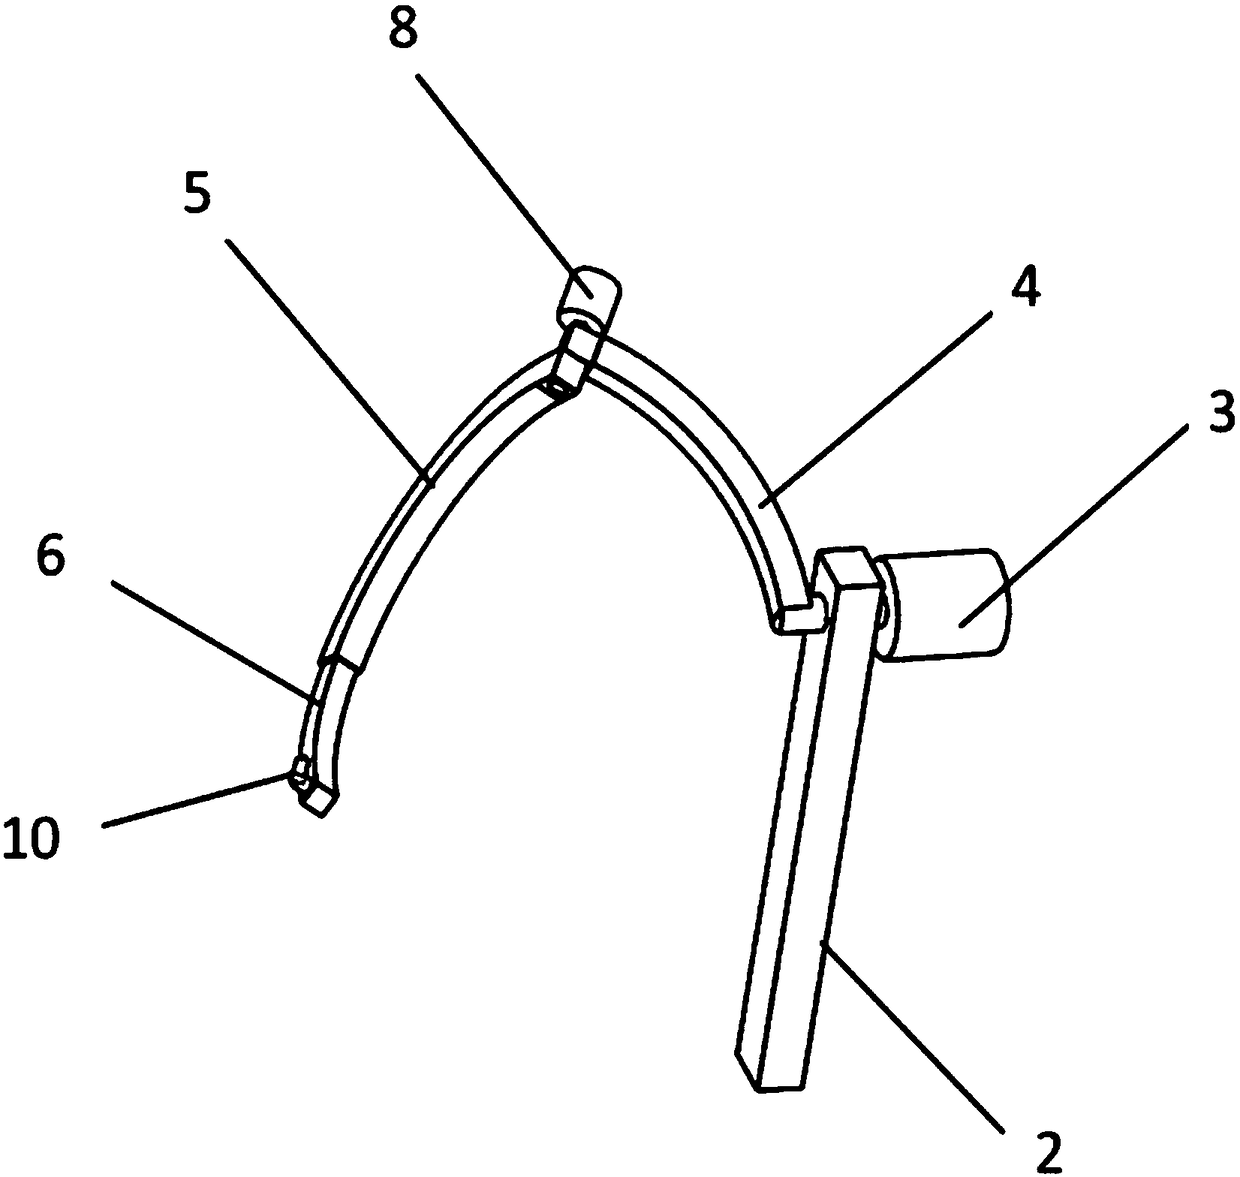 A three-branched six-degree-of-freedom parallel mechanism with arc-shaped moving pairs